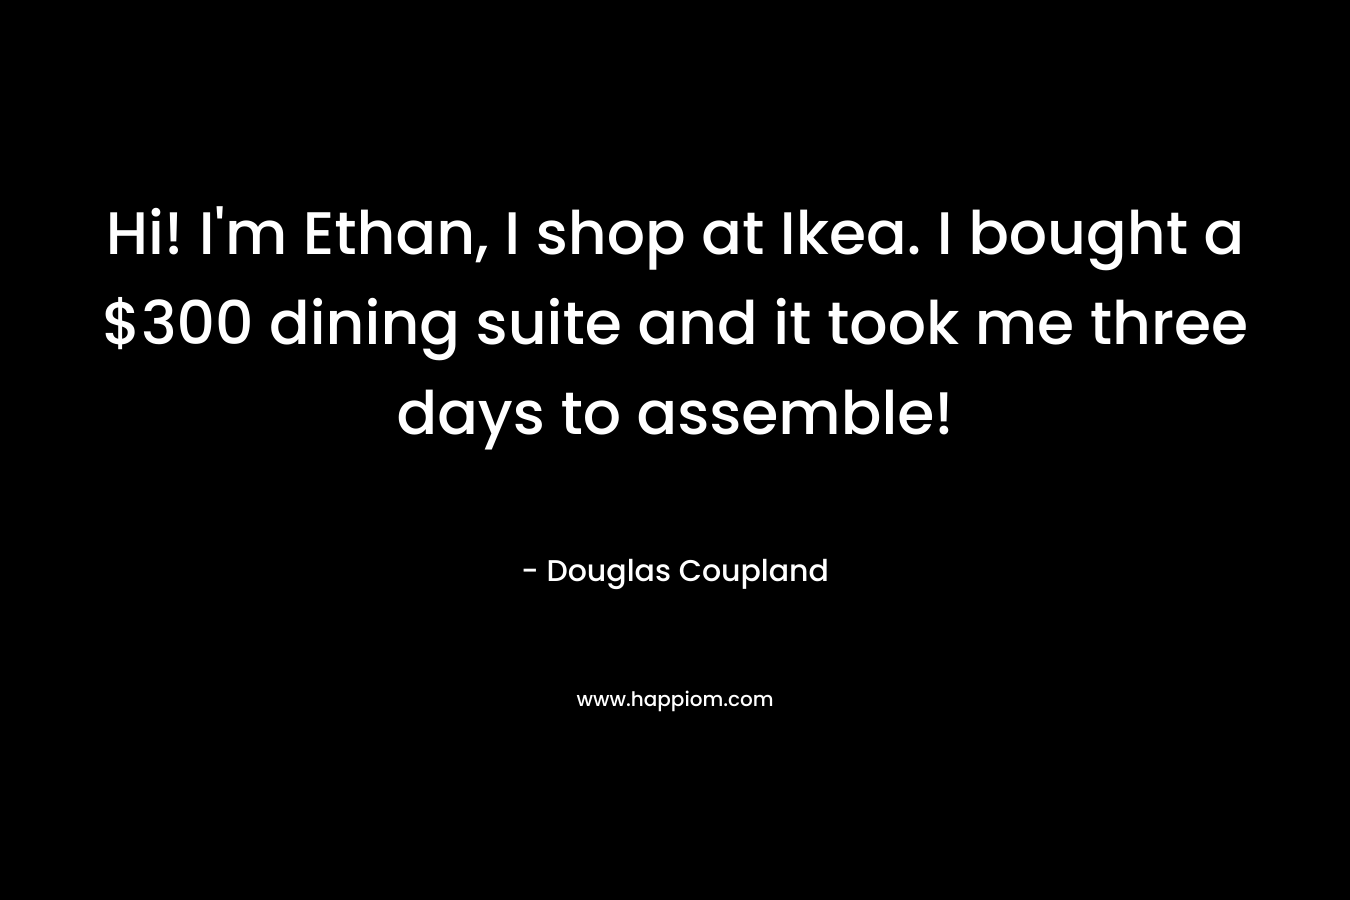 Hi! I'm Ethan, I shop at Ikea. I bought a $300 dining suite and it took me three days to assemble!